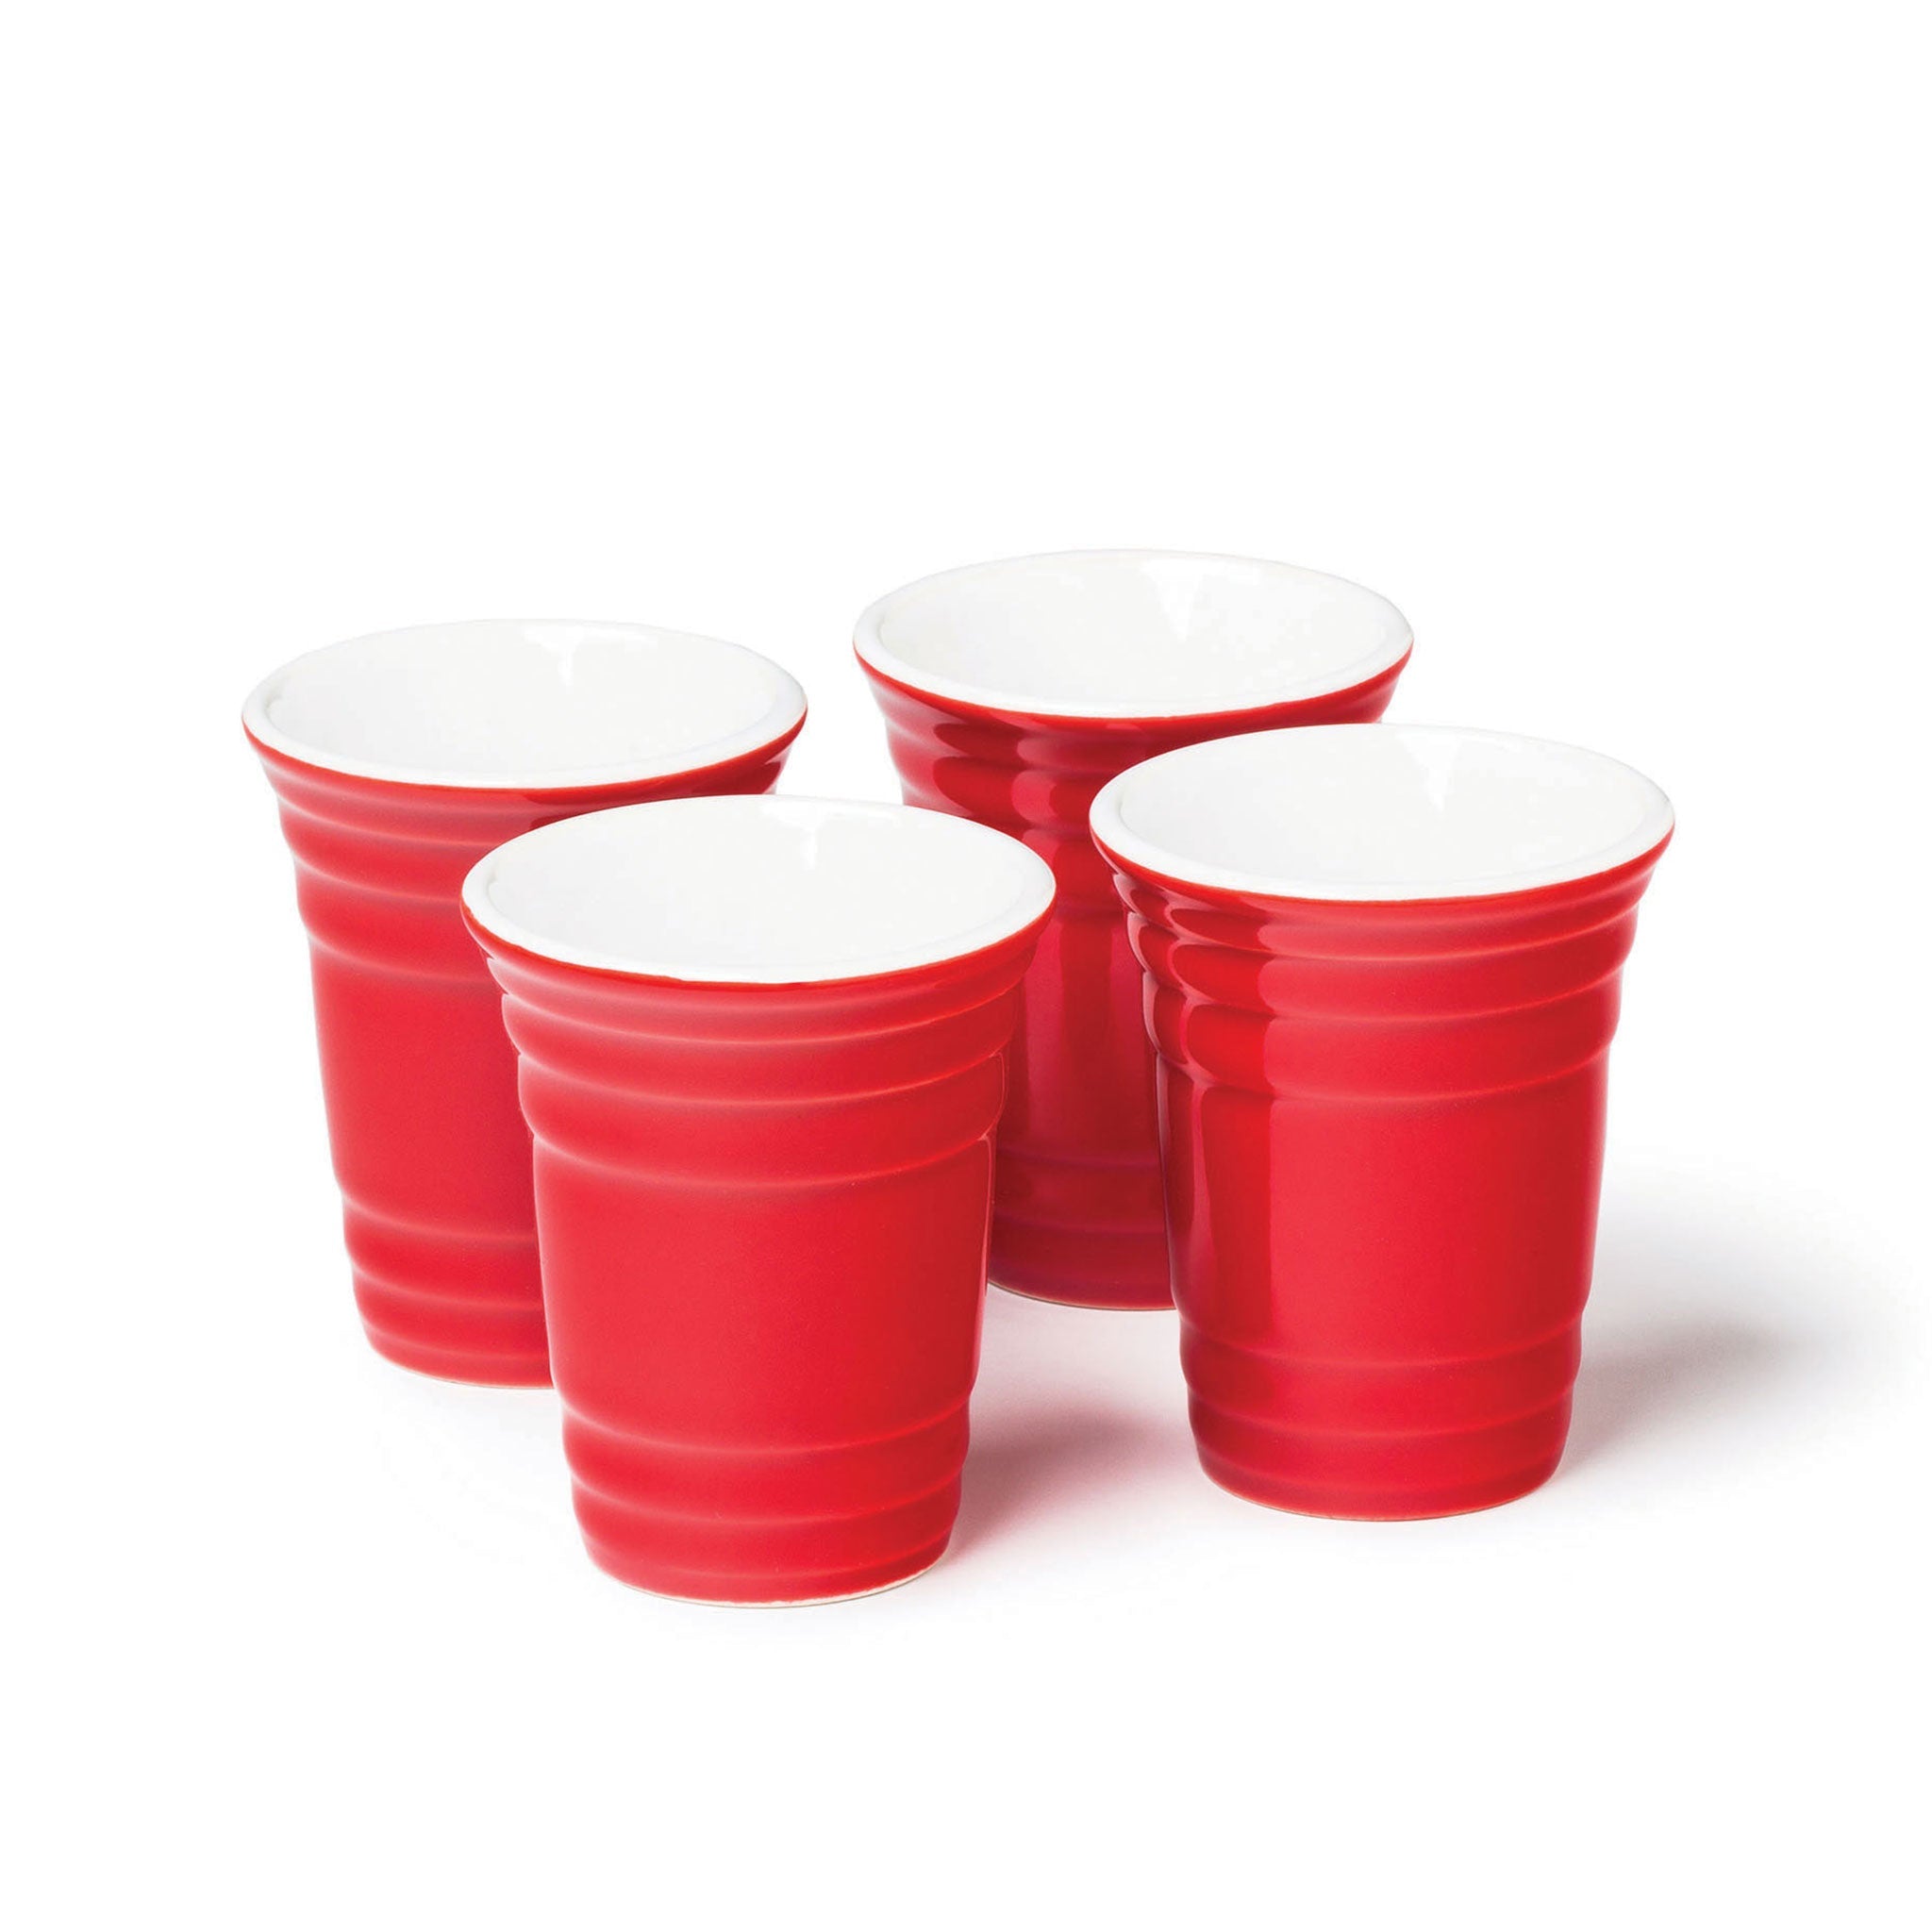 The Red Cup Shot Glass Set